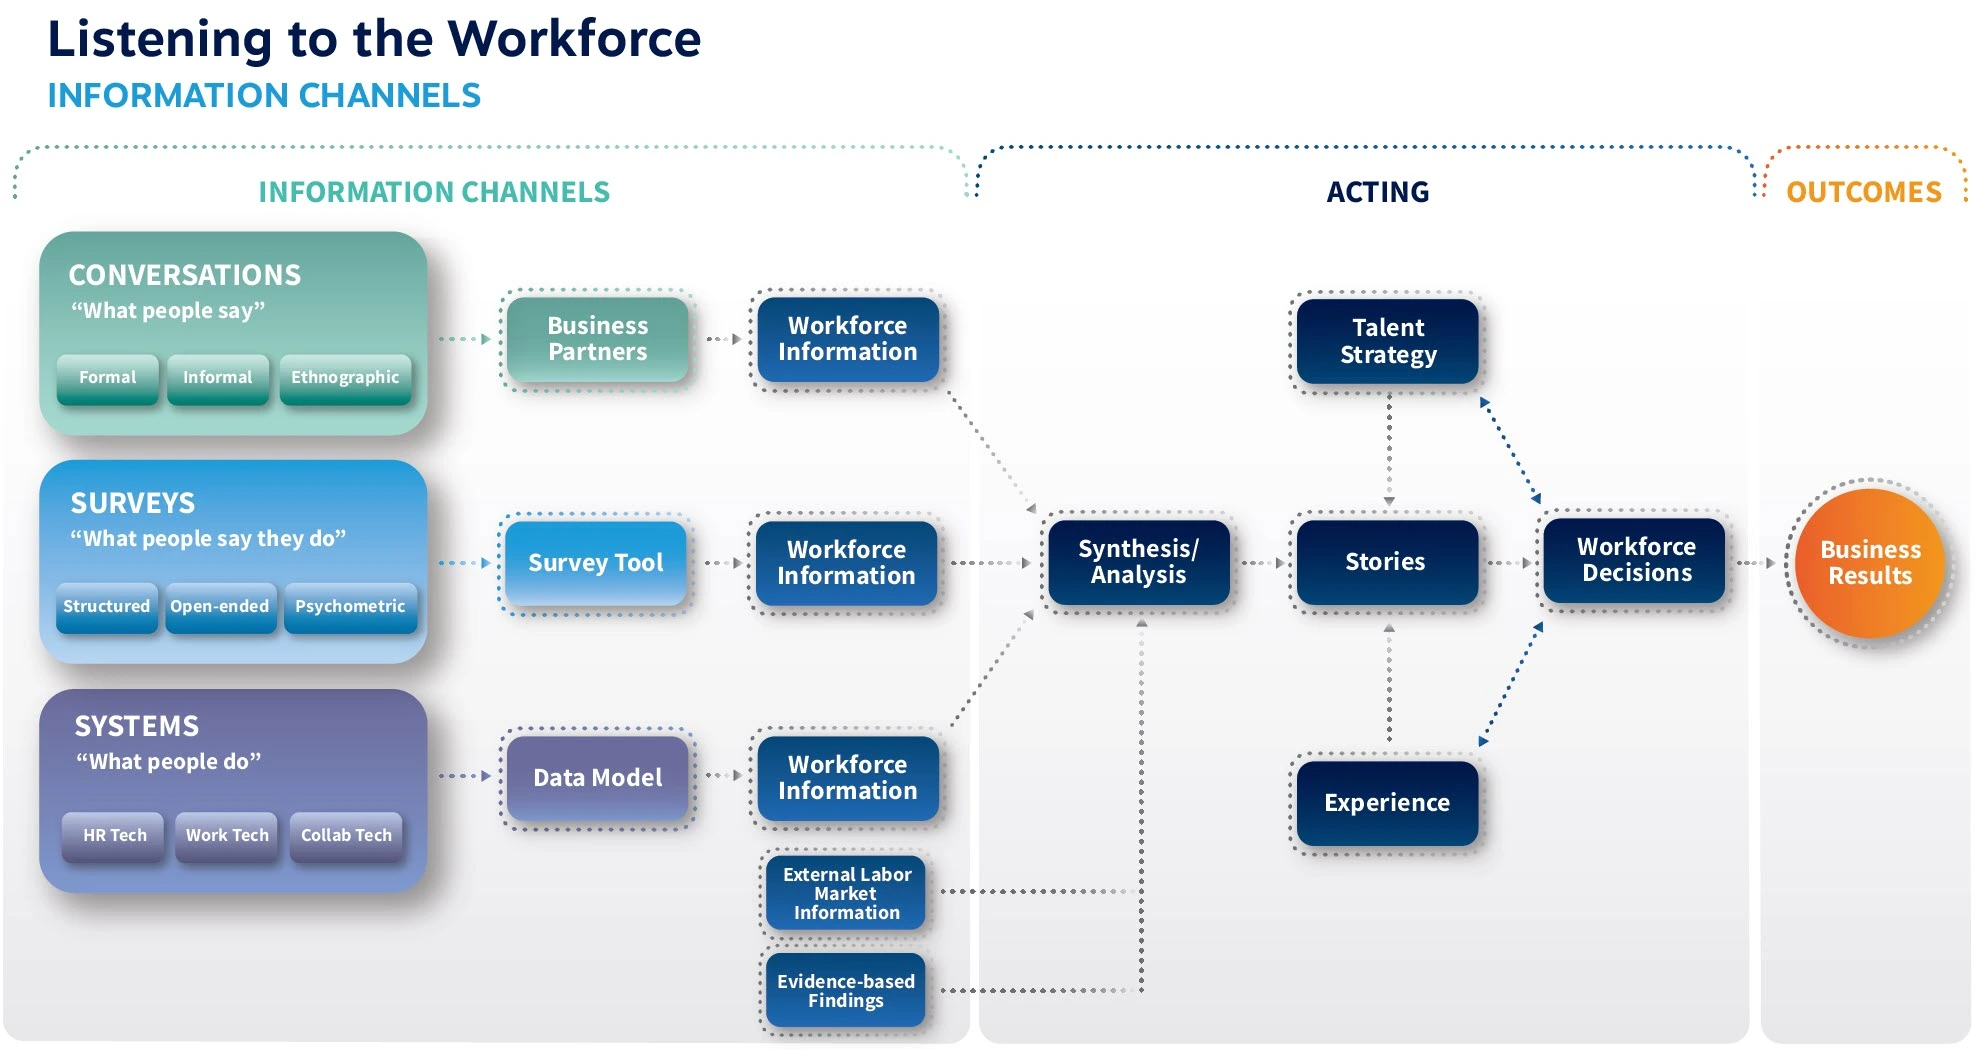 The Three Channels of Workforce Information: An Integrated Framework for Workforce Listening